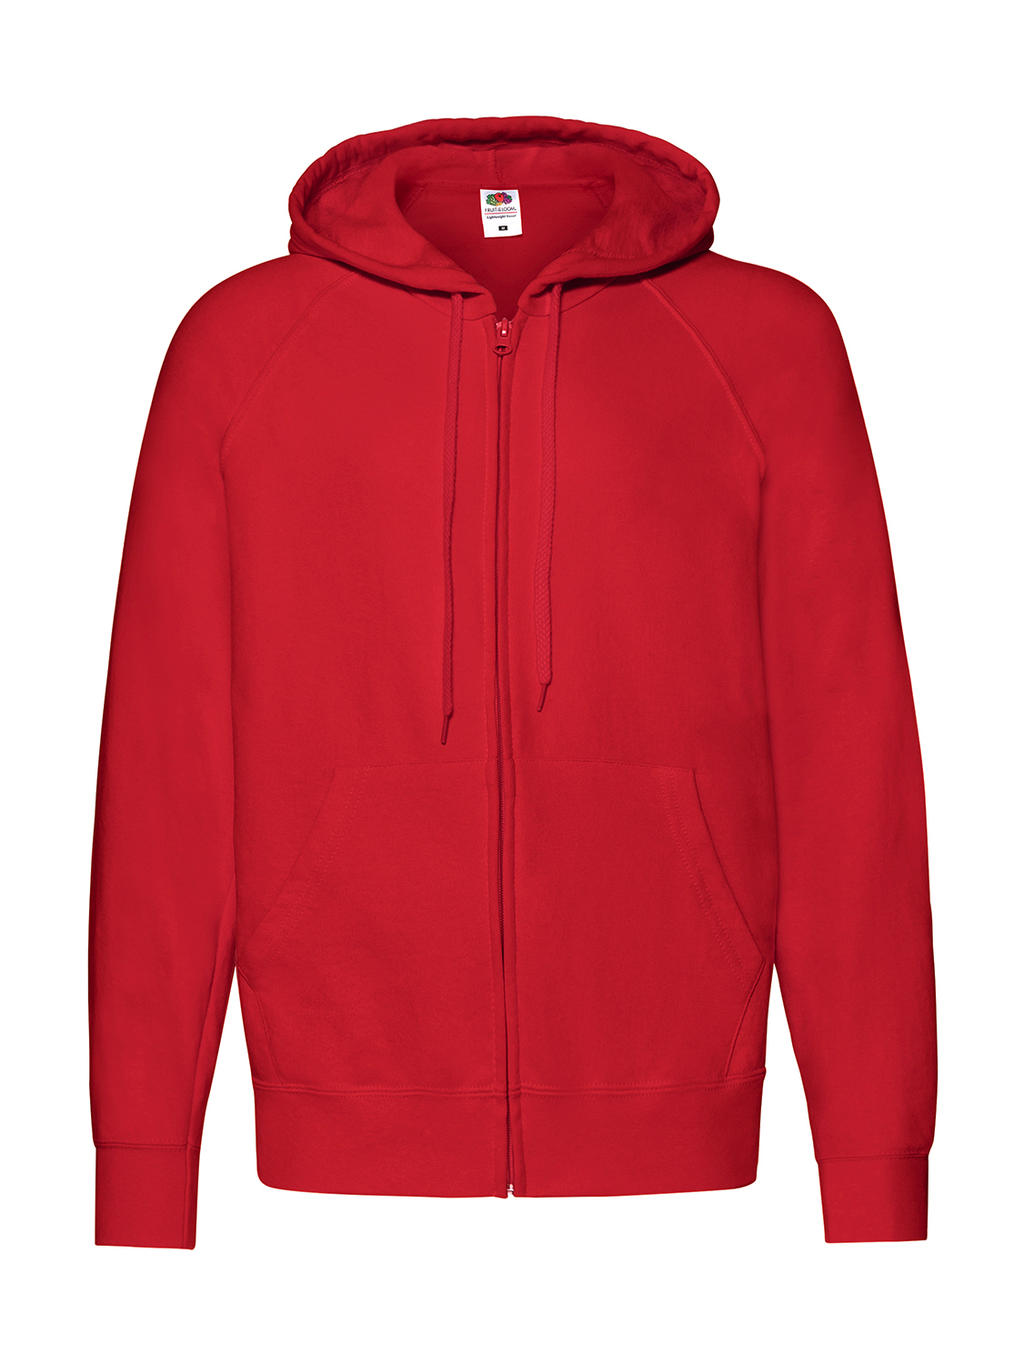  Lightweight Hooded Sweat Jacket in Farbe Red